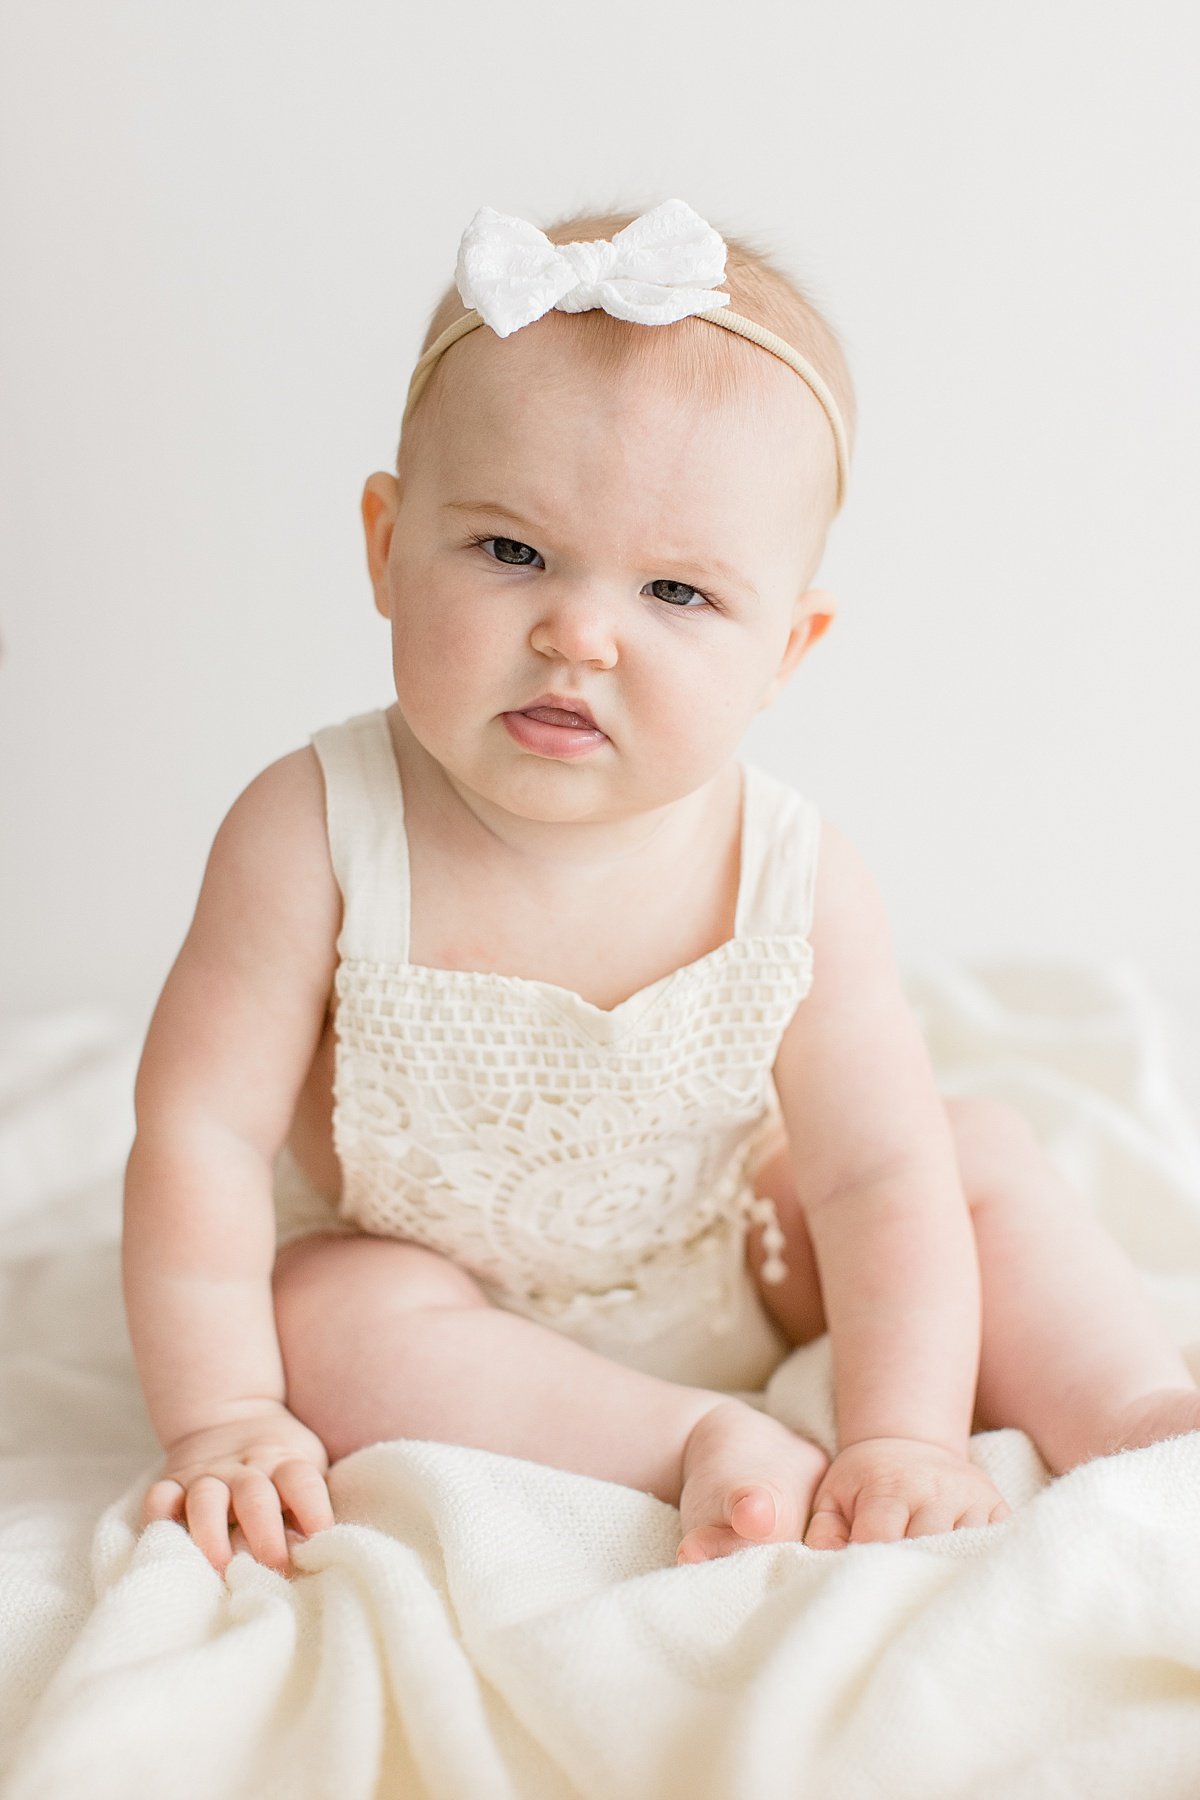 Baby girl making silly face during milestone studio portrait session | Ambre WIlliams Photography in Newport Beach Studio